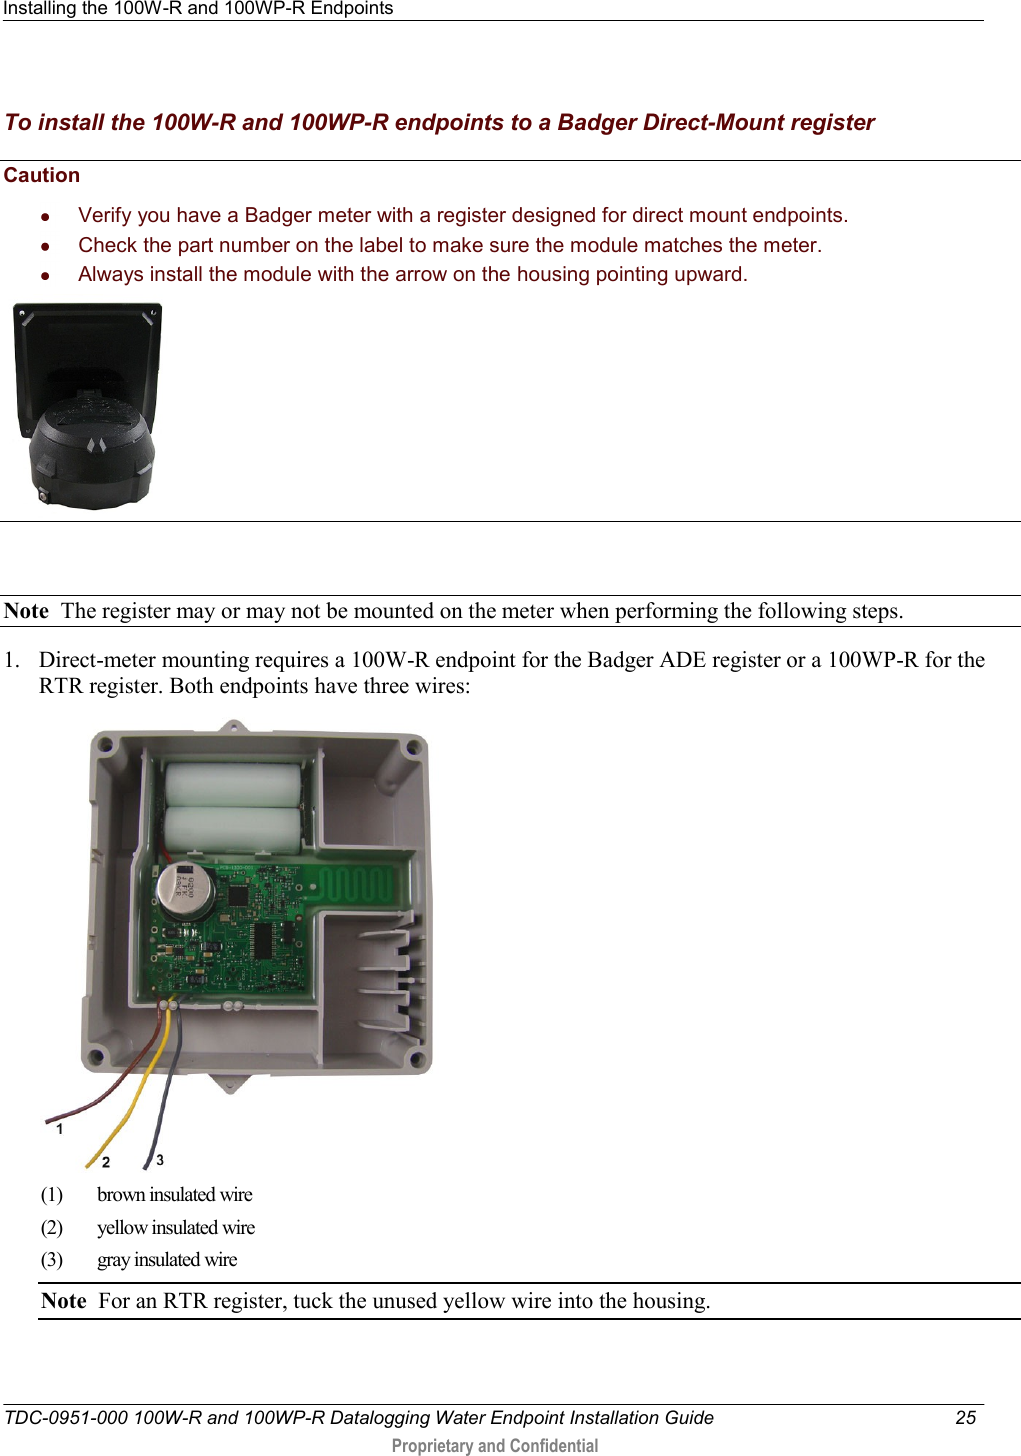 Installing the 100W-R and 100WP-R Endpoints   TDC-0951-000 100W-R and 100WP-R Datalogging Water Endpoint Installation Guide  25   Proprietary and Confidential     To install the 100W-R and 100WP-R endpoints to a Badger Direct-Mount register Caution     Verify you have a Badger meter with a register designed for direct mount endpoints.   Check the part number on the label to make sure the module matches the meter.   Always install the module with the arrow on the housing pointing upward.       Note  The register may or may not be mounted on the meter when performing the following steps.  1. Direct-meter mounting requires a 100W-R endpoint for the Badger ADE register or a 100WP-R for the RTR register. Both endpoints have three wires:  (1)  brown insulated wire (2) yellow insulated wire (3)  gray insulated wire Note  For an RTR register, tuck the unused yellow wire into the housing. 